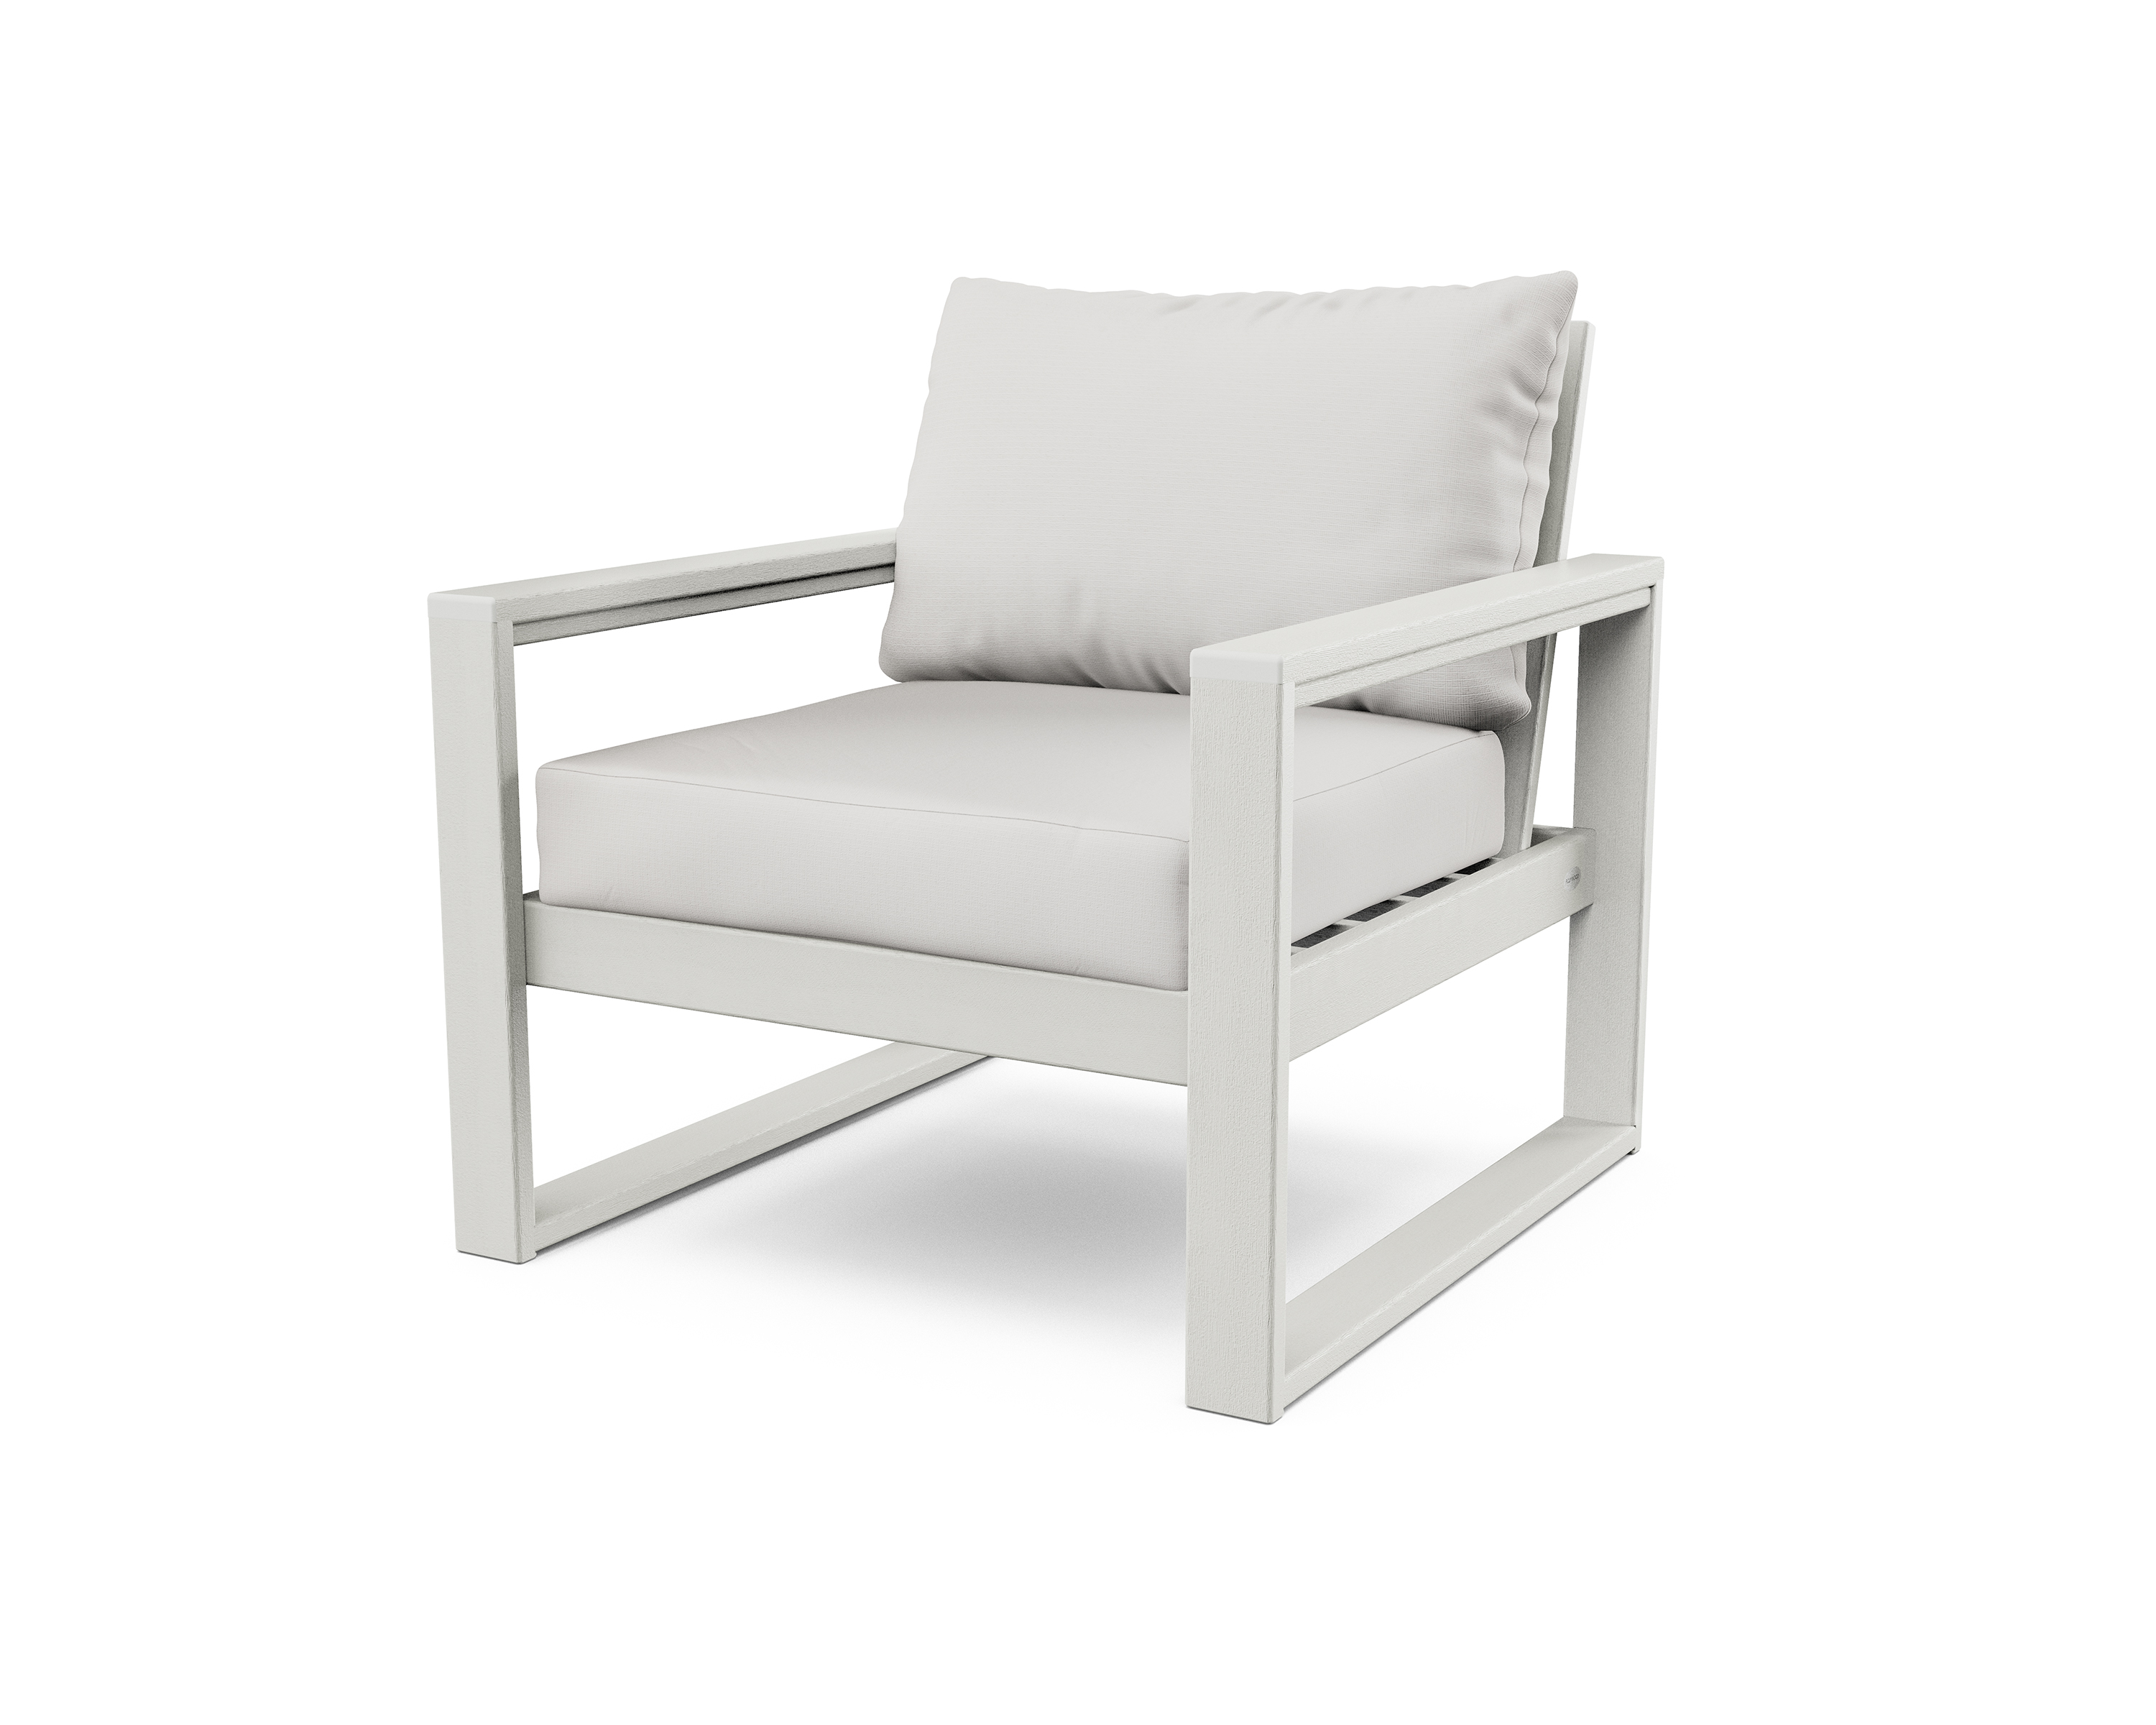 edge club chair in vintage white / textured linen product image